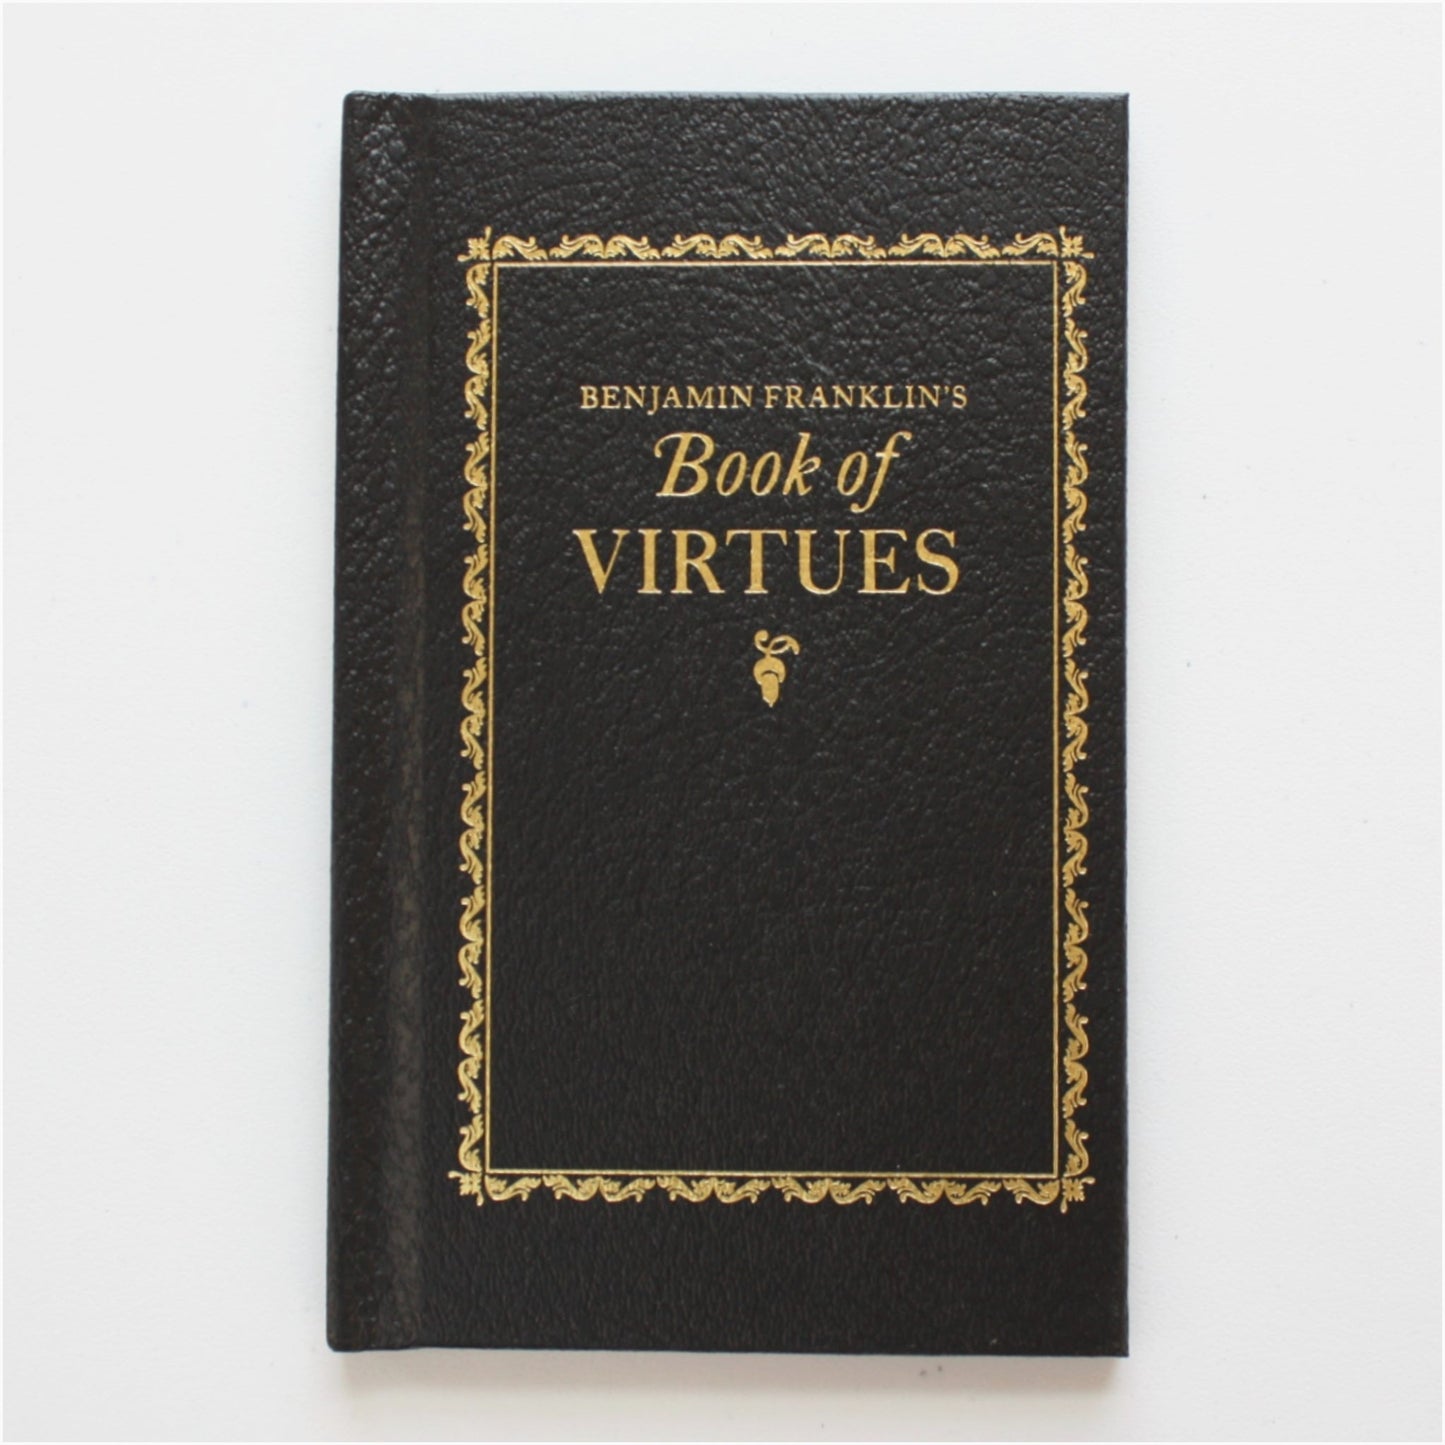 Benjamin Franklin's Book of Virtues - Made in the USA